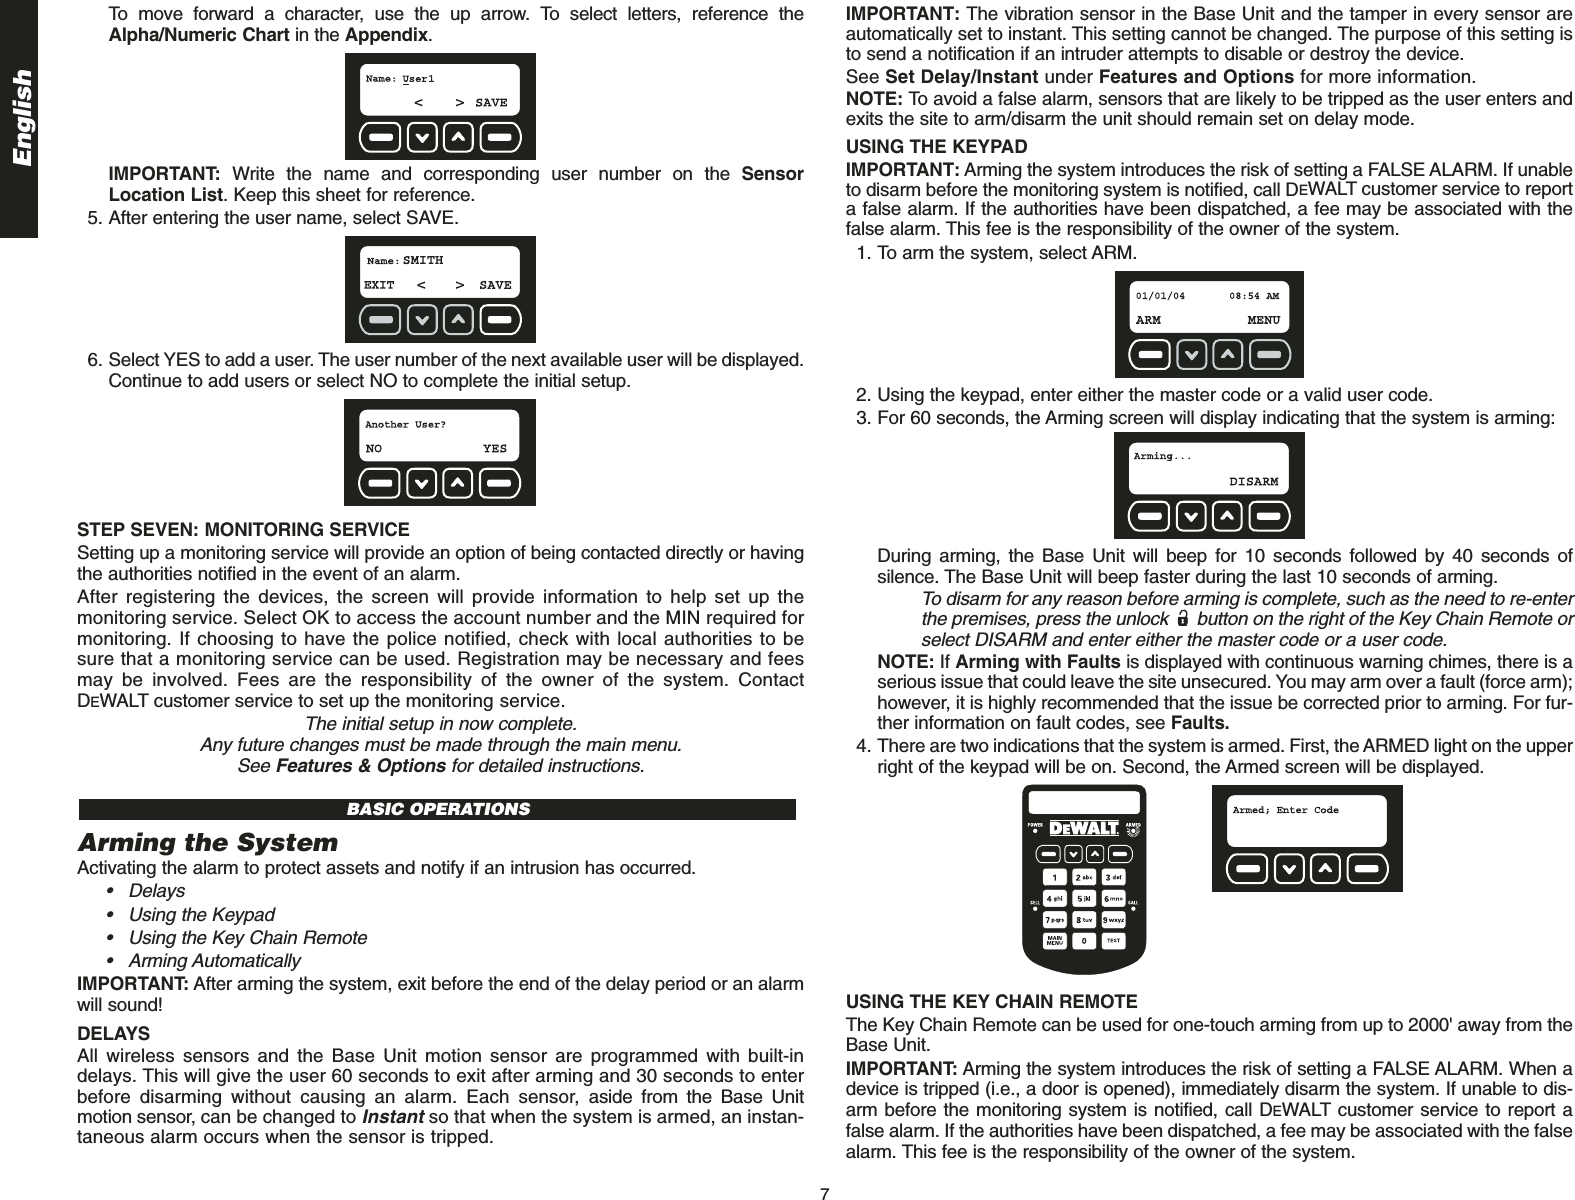 English7To move forward a character, use the up arrow. To select letters, reference theAlpha/Numeric Chart in the Appendix.IMPORTANT: Write the name and corresponding user number on the SensorLocation List. Keep this sheet for reference.5. After entering the user name, select SAVE.6. Select YES to add a user. The user number of the next available user will be displayed.Continue to add users or select NO to complete the initial setup.STEP SEVEN: MONITORING SERVICE Setting up a monitoring service will provide an option of being contacted directly or havingthe authorities notified in the event of an alarm.After registering the devices, the screen will provide information to help set up themonitoring service. Select OK to access the account number and the MIN required formonitoring. If choosing to have the police notified, check with local authorities to besure that a monitoring service can be used. Registration may be necessary and feesmay be involved. Fees are the responsibility of the owner of the system. ContactDEWALT customer service to set up the monitoring service.The initial setup in now complete. Any future changes must be made through the main menu. See Features &amp; Options for detailed instructions.Arming the SystemActivating the alarm to protect assets and notify if an intrusion has occurred.• Delays• Using the Keypad• Using the Key Chain Remote• Arming Automatically IMPORTANT: After arming the system, exit before the end of the delay period or an alarmwill sound!DELAYSAll wireless sensors and the Base Unit motion sensor are programmed with built-indelays. This will give the user 60 seconds to exit after arming and 30 seconds to enterbefore disarming without causing an alarm. Each sensor, aside from the Base Unitmotion sensor, can be changed to Instantso that when the system is armed, an instan-taneous alarm occurs when the sensor is tripped.BASIC OPERATIONSIMPORTANT: The vibration sensor in the Base Unit and the tamper in every sensor areautomatically set to instant. This setting cannot be changed. The purpose of this setting isto send a notification if an intruder attempts to disable or destroy the device.See Set Delay/Instant under Features and Options for more information. NOTE: To avoid a false alarm, sensors that are likely to be tripped as the user enters andexits the site to arm/disarm the unit should remain set on delay mode. USING THE KEYPAD IMPORTANT: Arming the system introduces the risk of setting a FALSE ALARM. If unableto disarm before the monitoring system is notified, call DEWALT customer service to reporta false alarm. If the authorities have been dispatched, a fee may be associated with thefalse alarm. This fee is the responsibility of the owner of the system.1. To arm the system, select ARM.2. Using the keypad, enter either the master code or a valid user code.3. For 60 seconds, the Arming screen will display indicating that the system is arming: During arming, the Base Unit will beep for 10 seconds followed by 40 seconds ofsilence. The Base Unit will beep faster during the last 10 seconds of arming. To disarm for any reason before arming is complete, such as the need to re-enterthe premises, press the unlock  button on the right of the Key Chain Remote orselect DISARM and enter either the master code or a user code.NOTE: If Arming with Faults is displayed with continuous warning chimes, there is aserious issue that could leave the site unsecured. You may arm over a fault (force arm);however, it is highly recommended that the issue be corrected prior to arming. For fur-ther information on fault codes, see Faults.4. There are two indications that the system is armed. First, the ARMED light on the upperright of the keypad will be on. Second, the Armed screen will be displayed.USING THE KEY CHAIN REMOTE The Key Chain Remote can be used for one-touch arming from up to 2000&apos; away from theBase Unit.IMPORTANT: Arming the system introduces the risk of setting a FALSE ALARM. When adevice is tripped (i.e., a door is opened), immediately disarm the system. If unable to dis-arm before the monitoring system is notified, call DEWALT customer service to report afalse alarm. If the authorities have been dispatched, a fee may be associated with the falsealarm. This fee is the responsibility of the owner of the system.